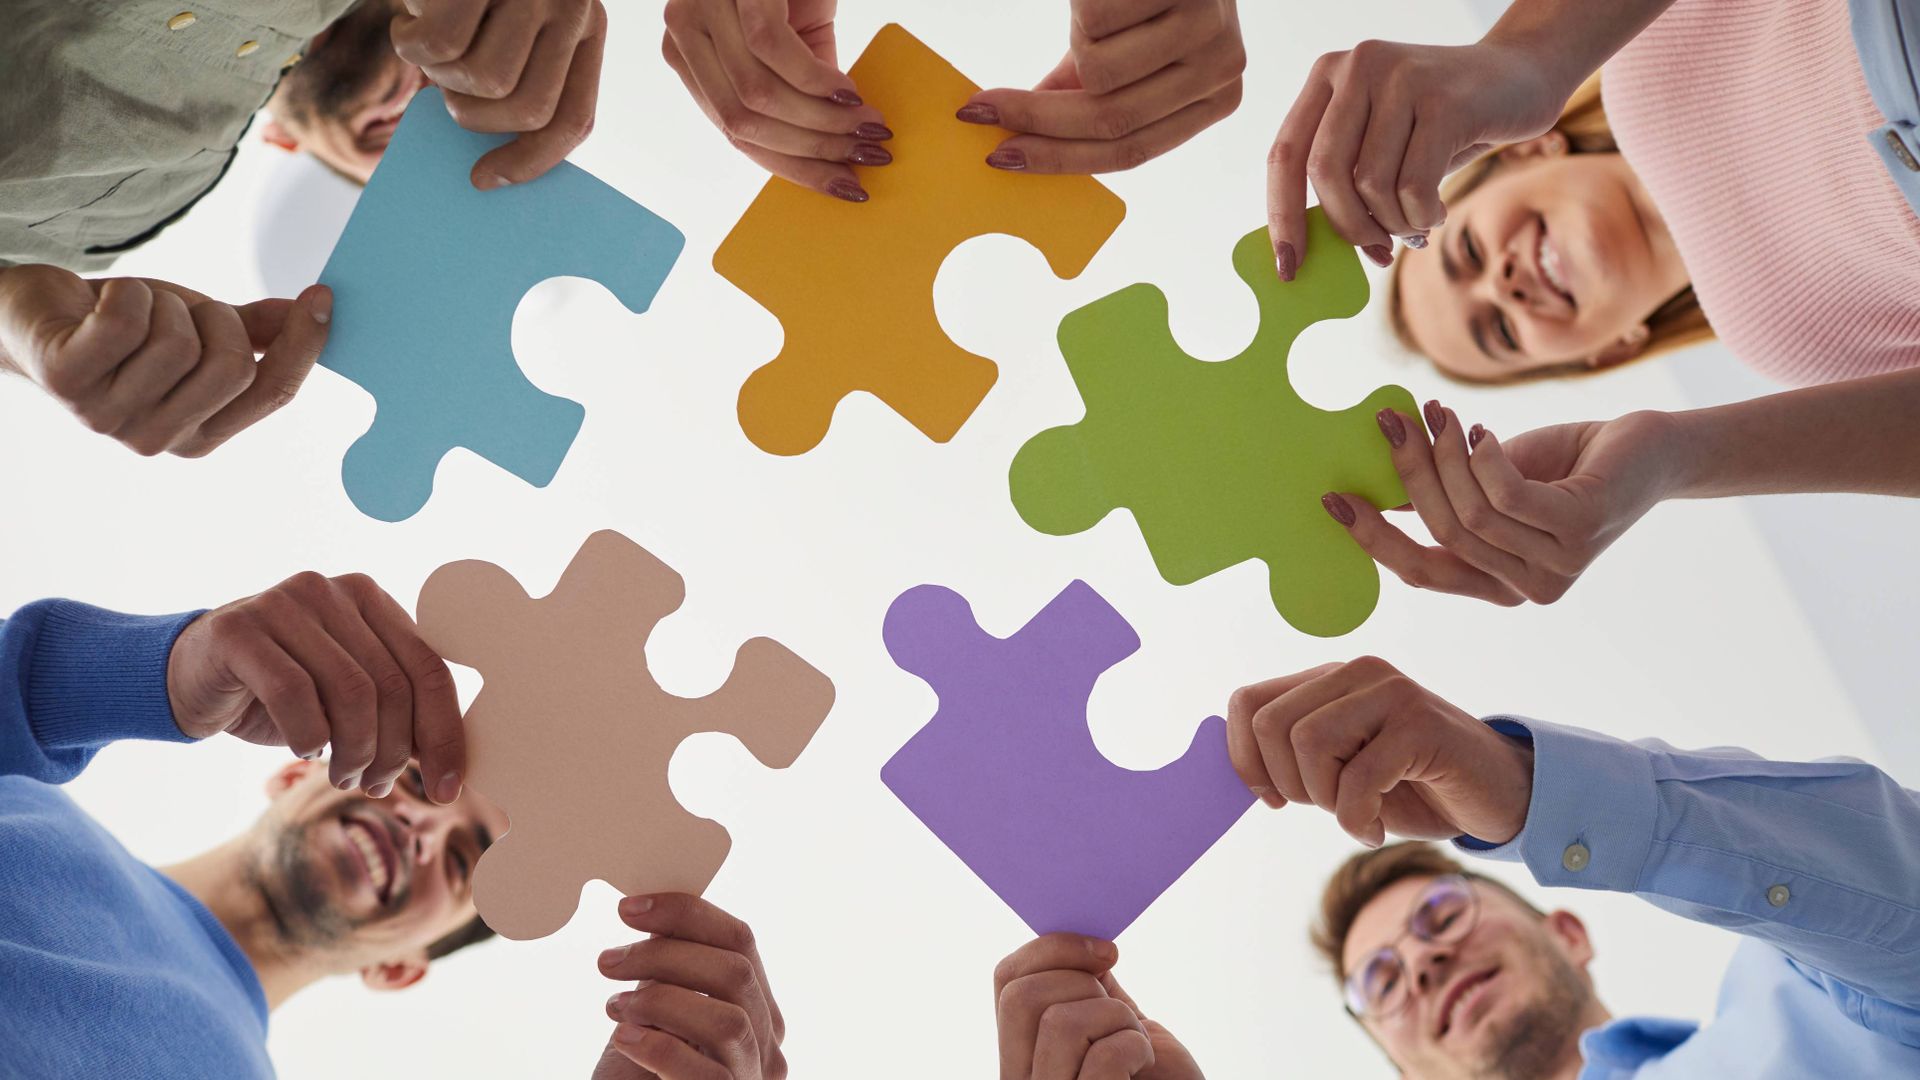 Image of team members holding pieces of a jigsaw puzzle